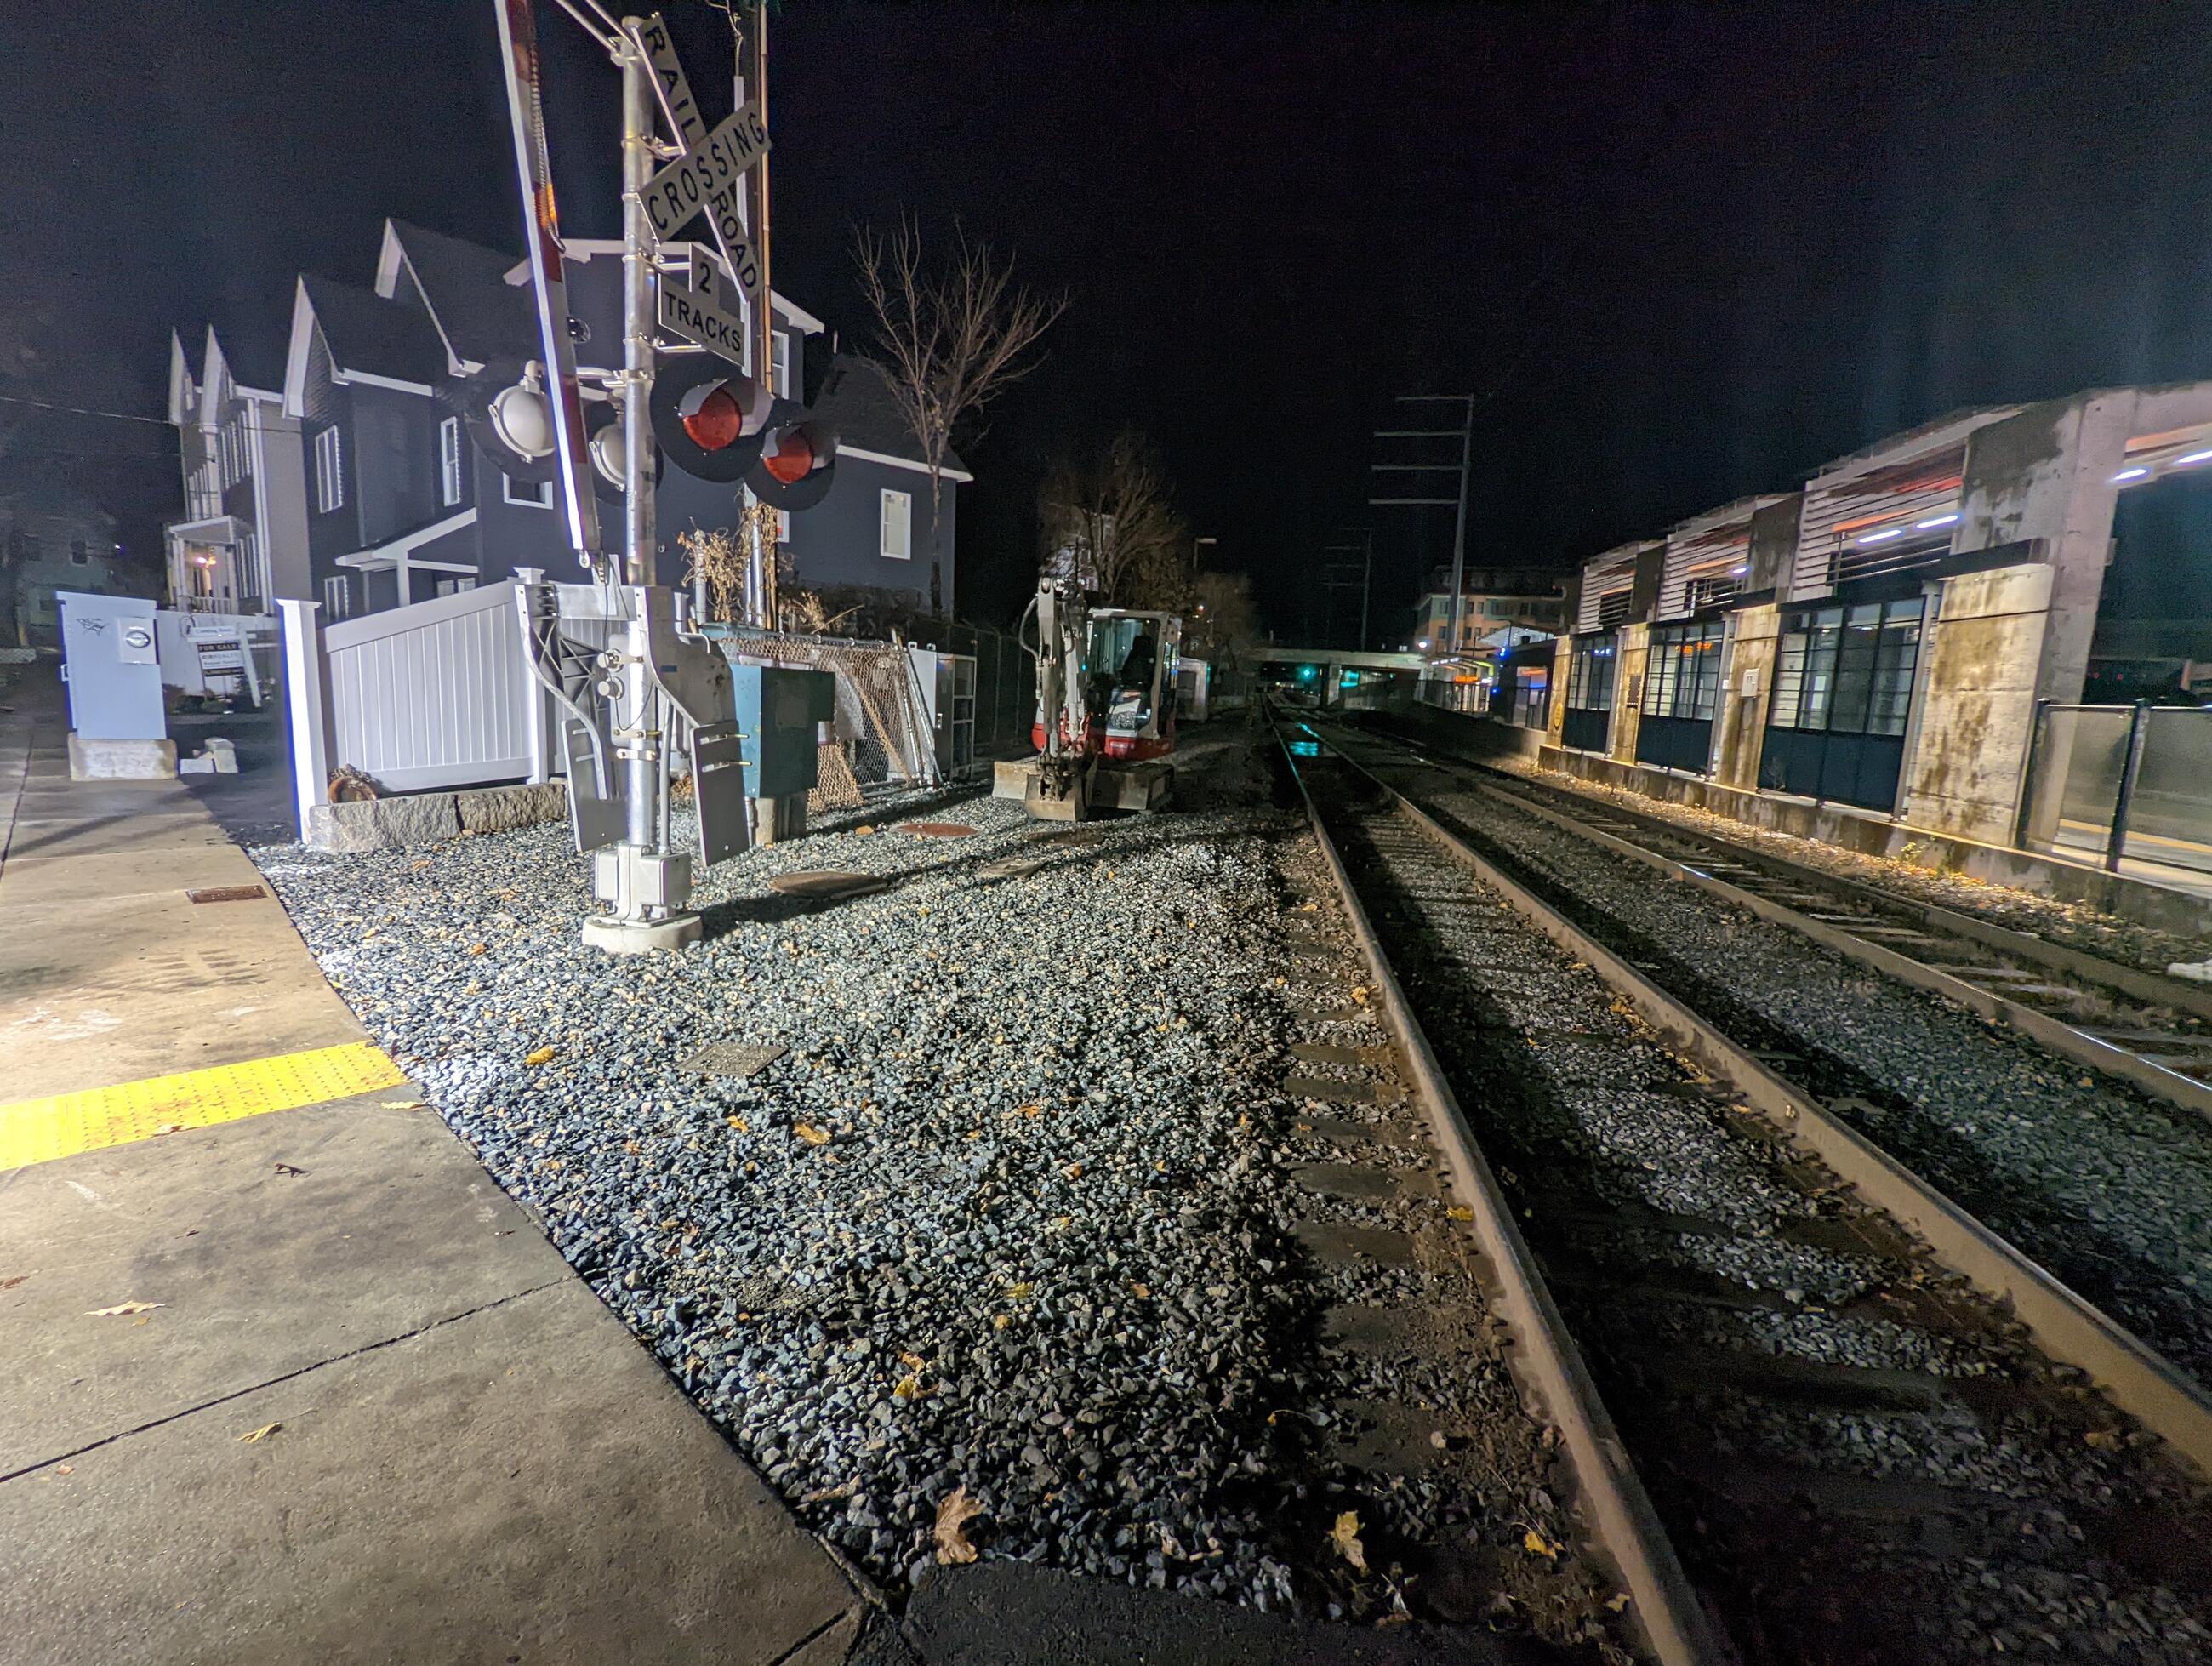 The site of the old Chelsea station is shown in a photo taken at night. At left is the railroad crossing with a fence and houses behind it, and a sidewalk to its left. In front of the crossing is a patch of gravel. At right is a train track. At far right is the back of the new Chelsea station. 